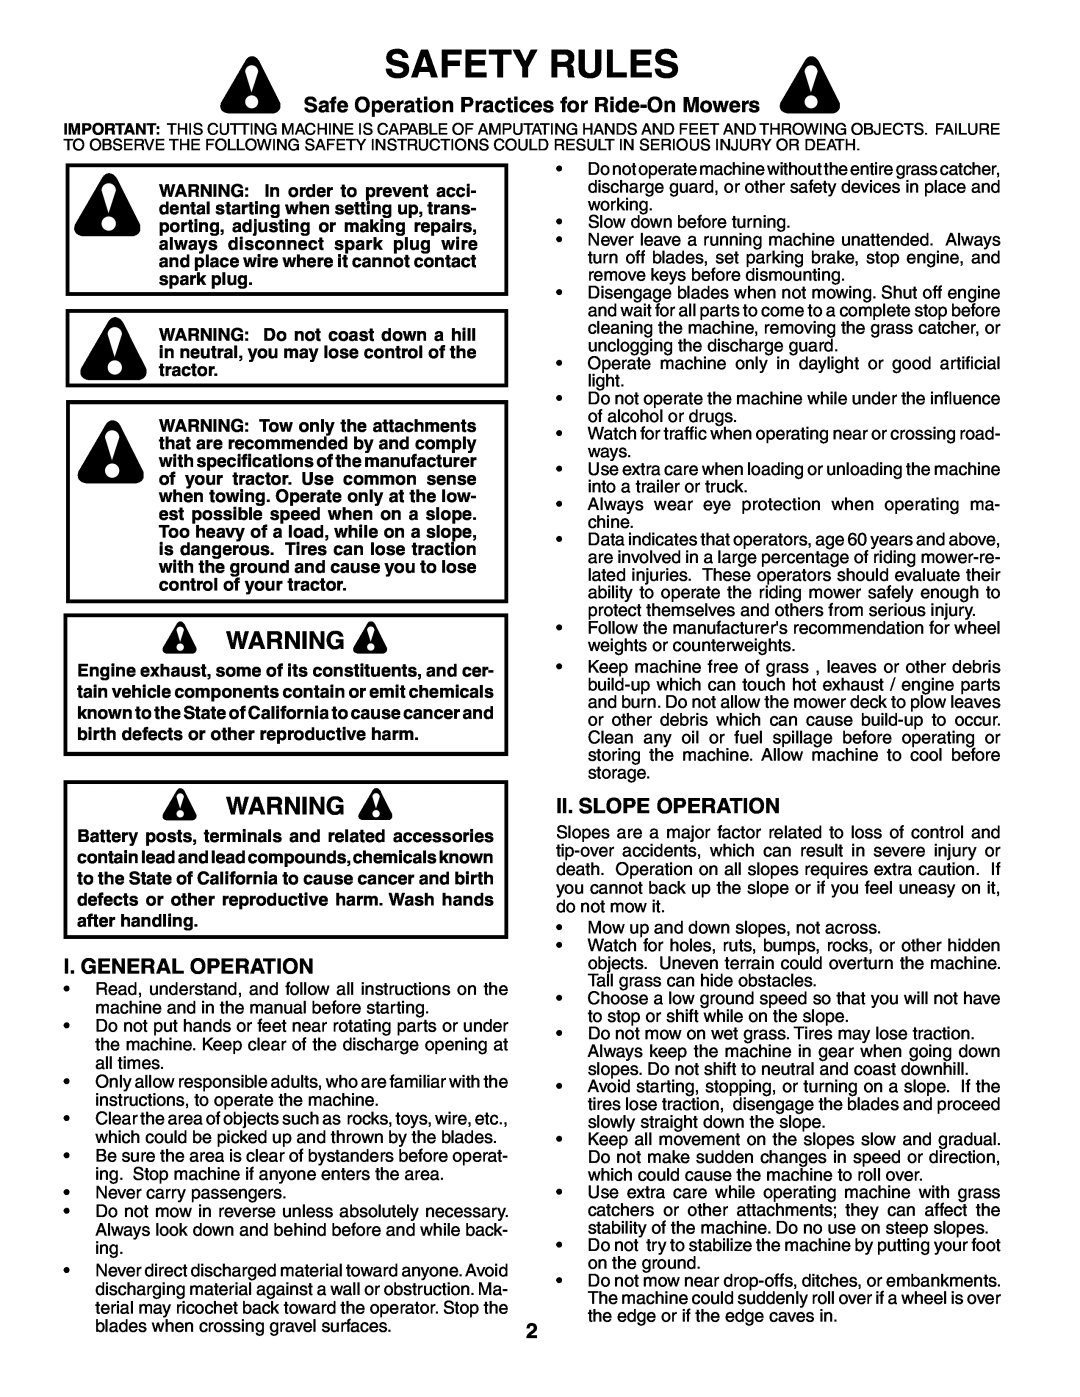 Poulan 194993 manual Safety Rules, Safe Operation Practices for Ride-On Mowers, I. General Operation, Ii. Slope Operation 